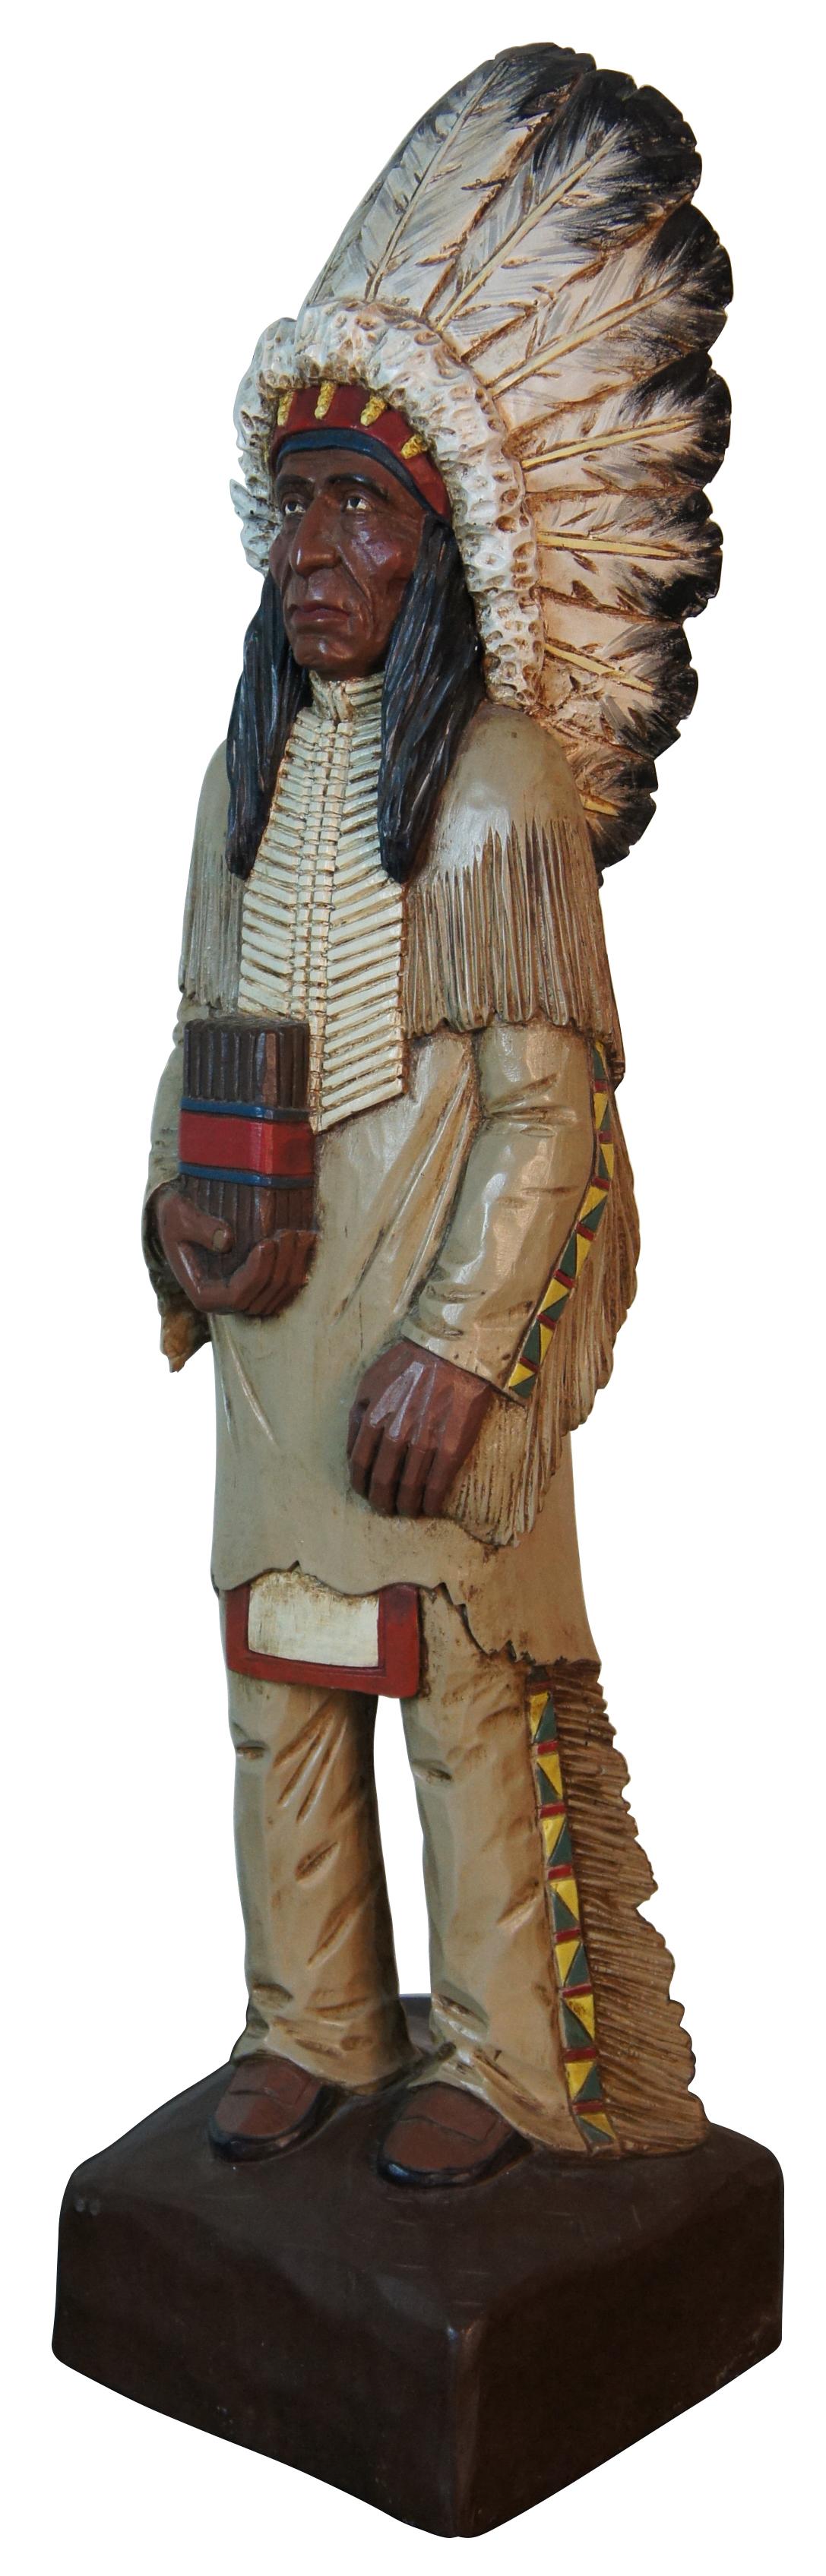 Vintage hand carved wood sculpture in the shape of a Native American man in a large feathered headdress, holding a package of cigars. Signed on the base “Sue Elliott 6/88.” The word “Weeks” is carved lightly on one side of the base. A fun mercantile